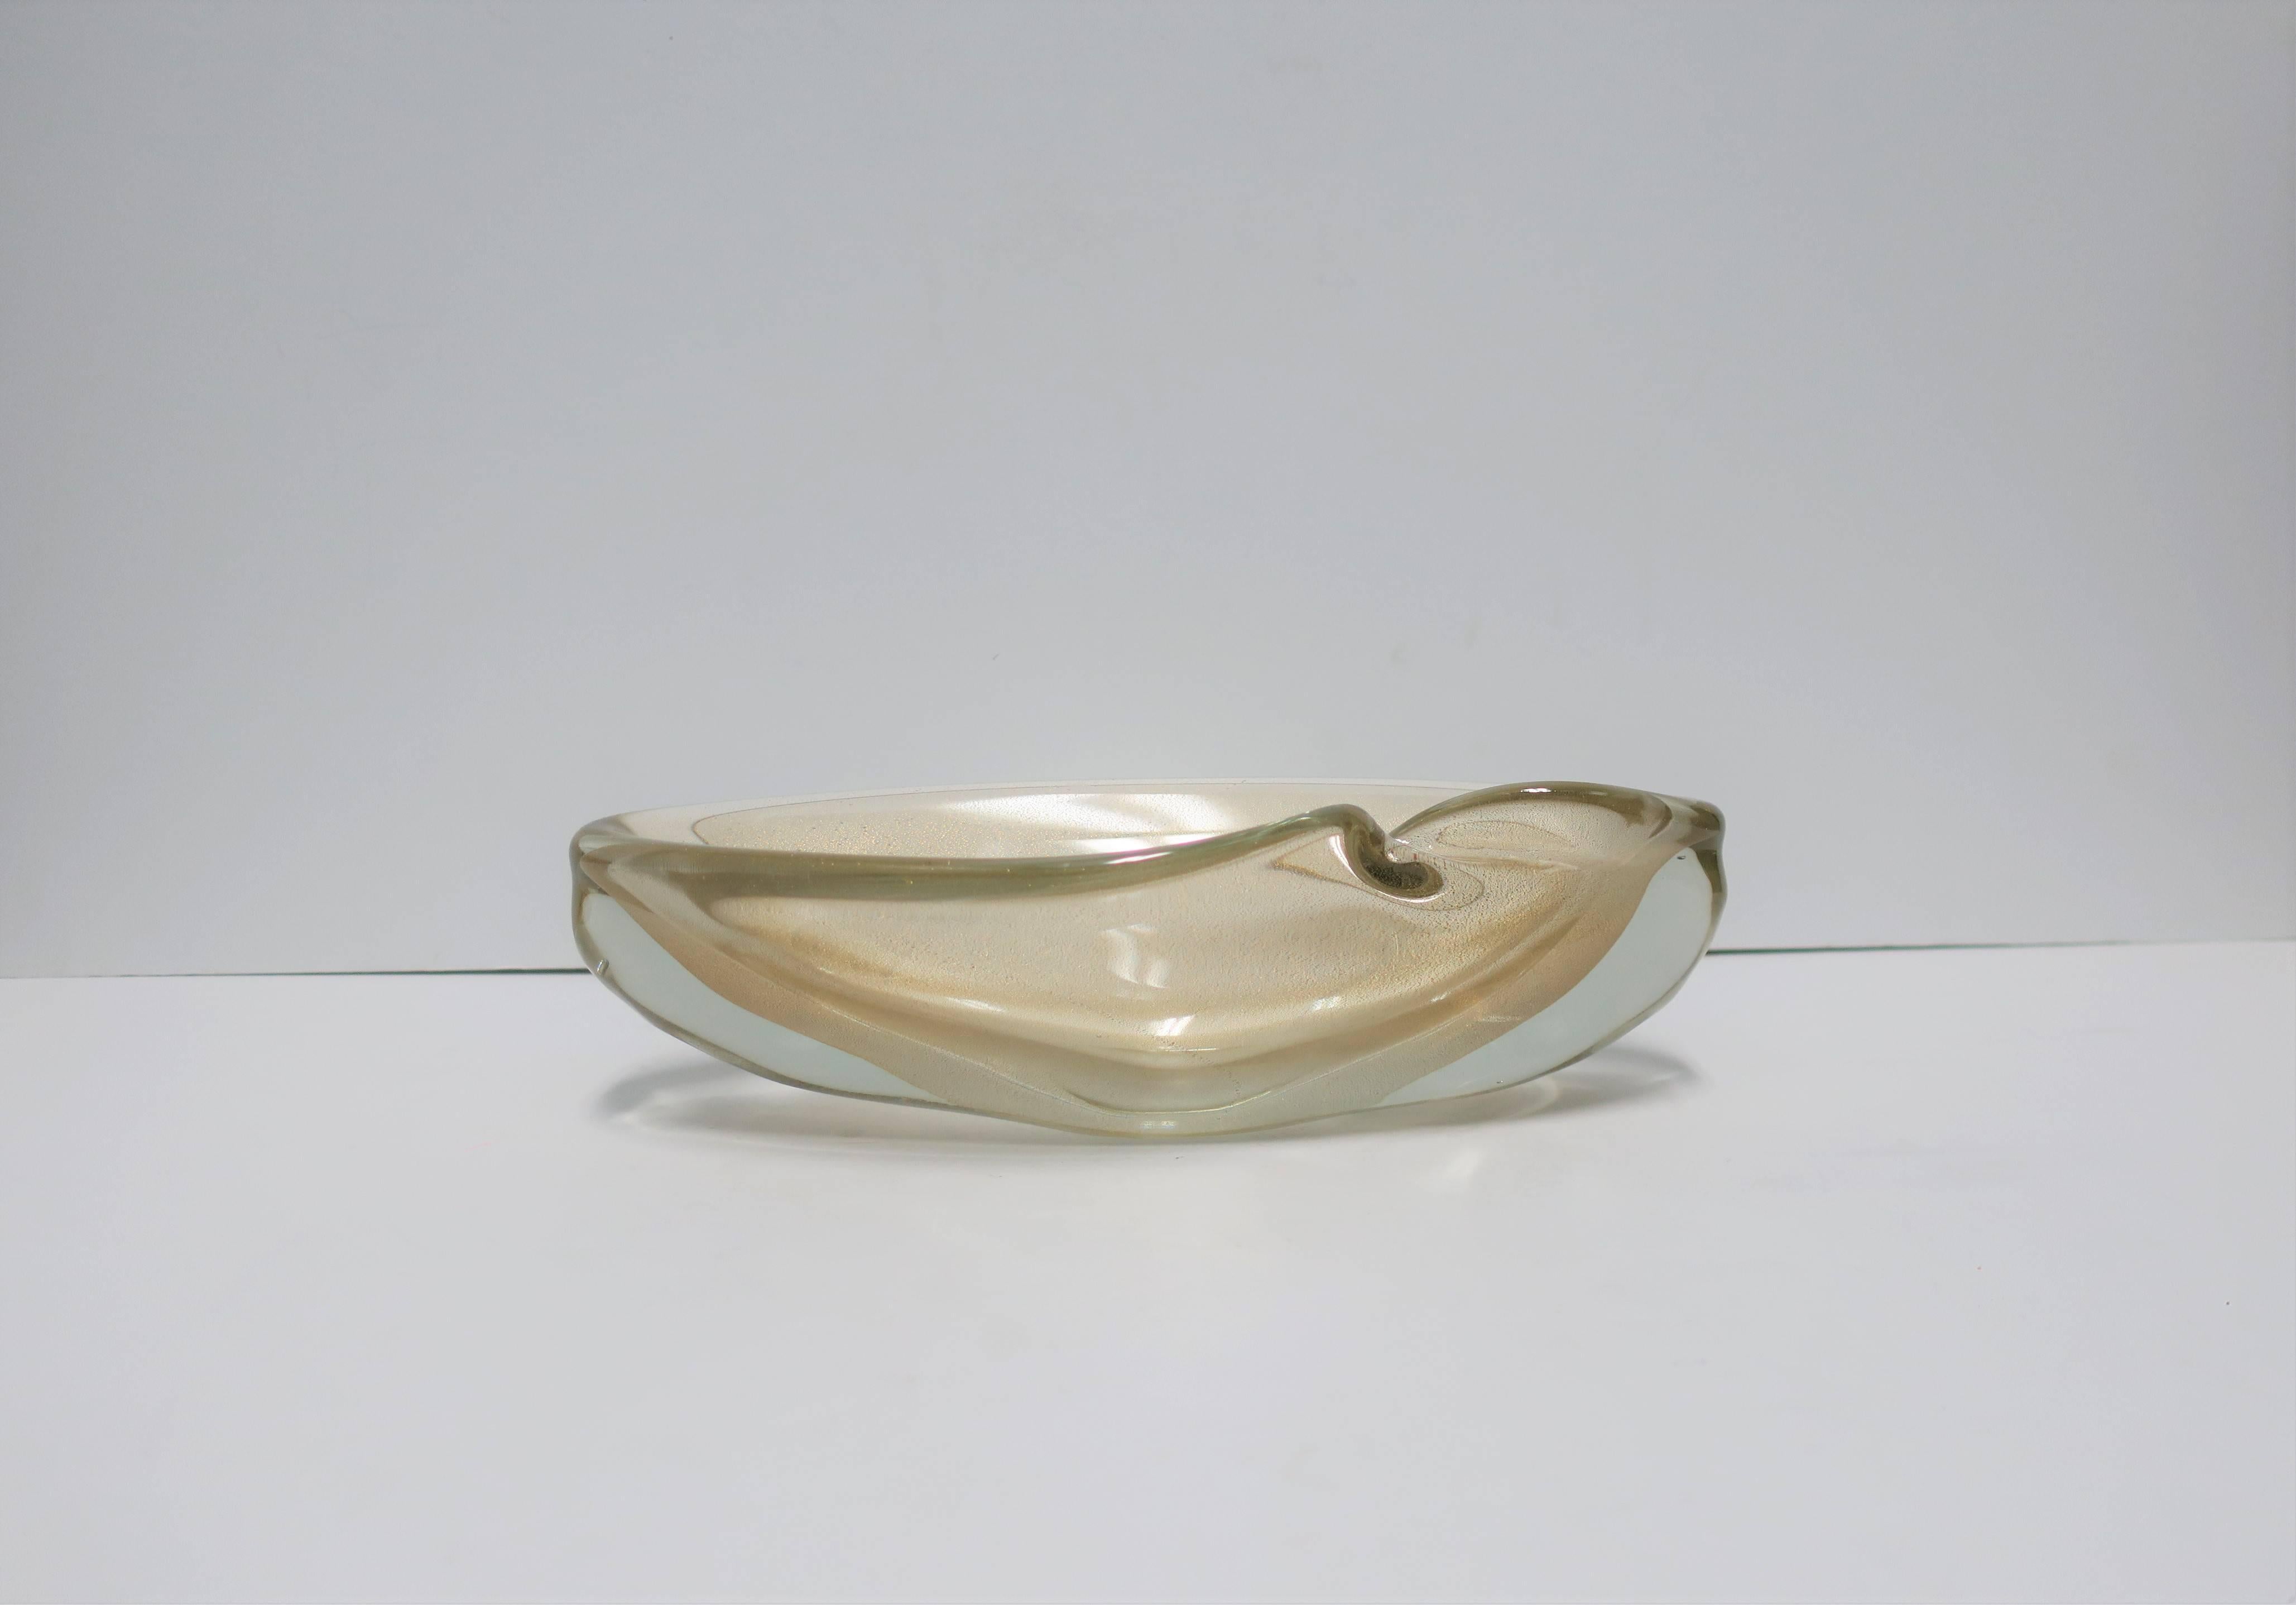 A beautiful and substantial Italian Murano oblong bowl. Bowl is clear Murano art glass mixed with shimmering gold, an intentional 'indent', and a soft and beautiful finish in an organic form. Attributed to Italian designer Seguso, Italy. Piece is